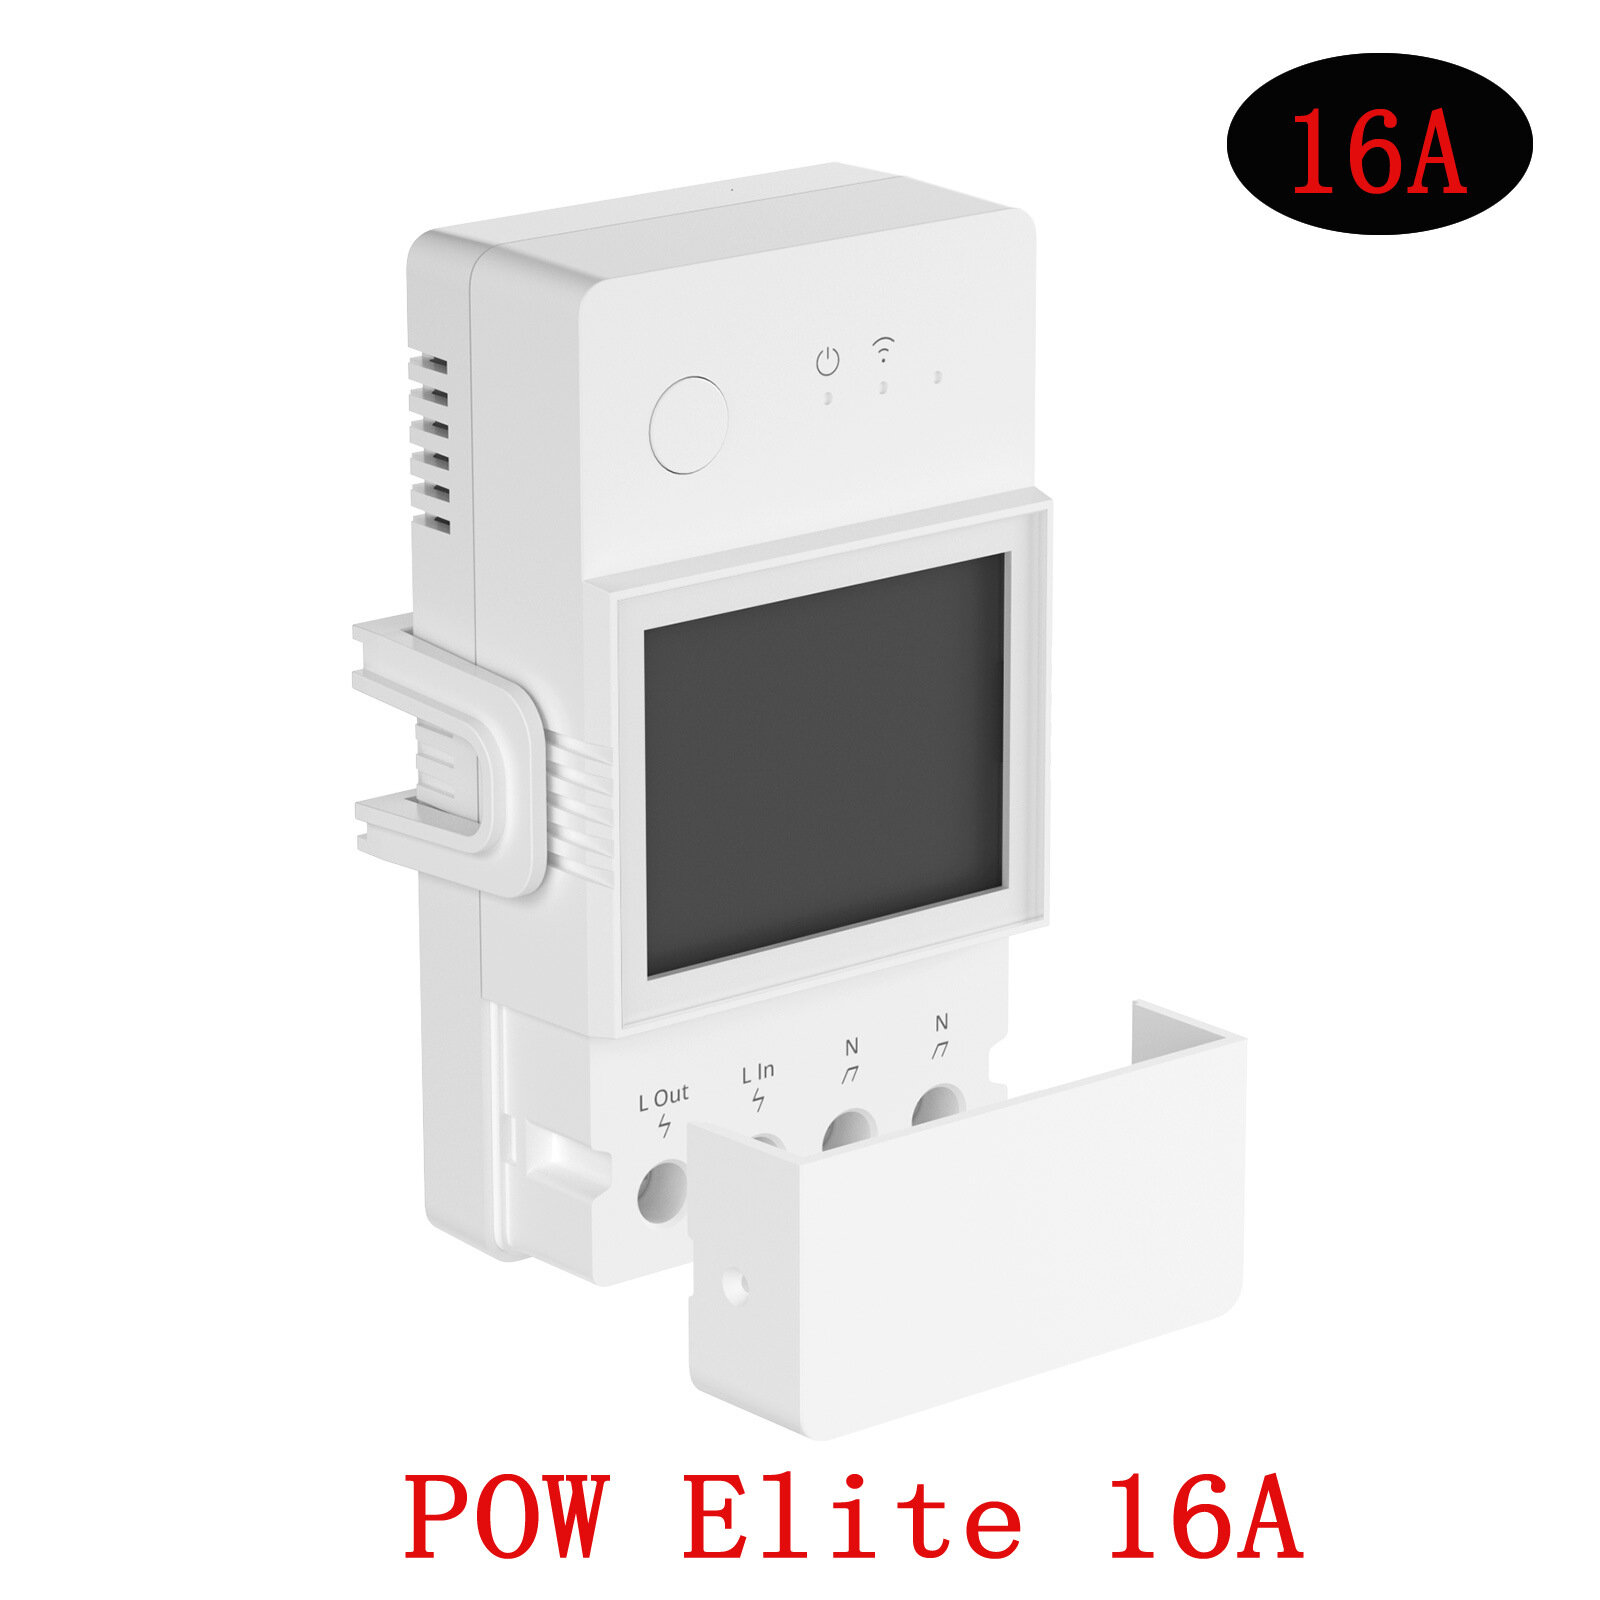 

Sonoff POW Elite 16A Smart Wifi Power Meter Switch Intelligent Energy Controller 6-Month Consumption History Data Overlo